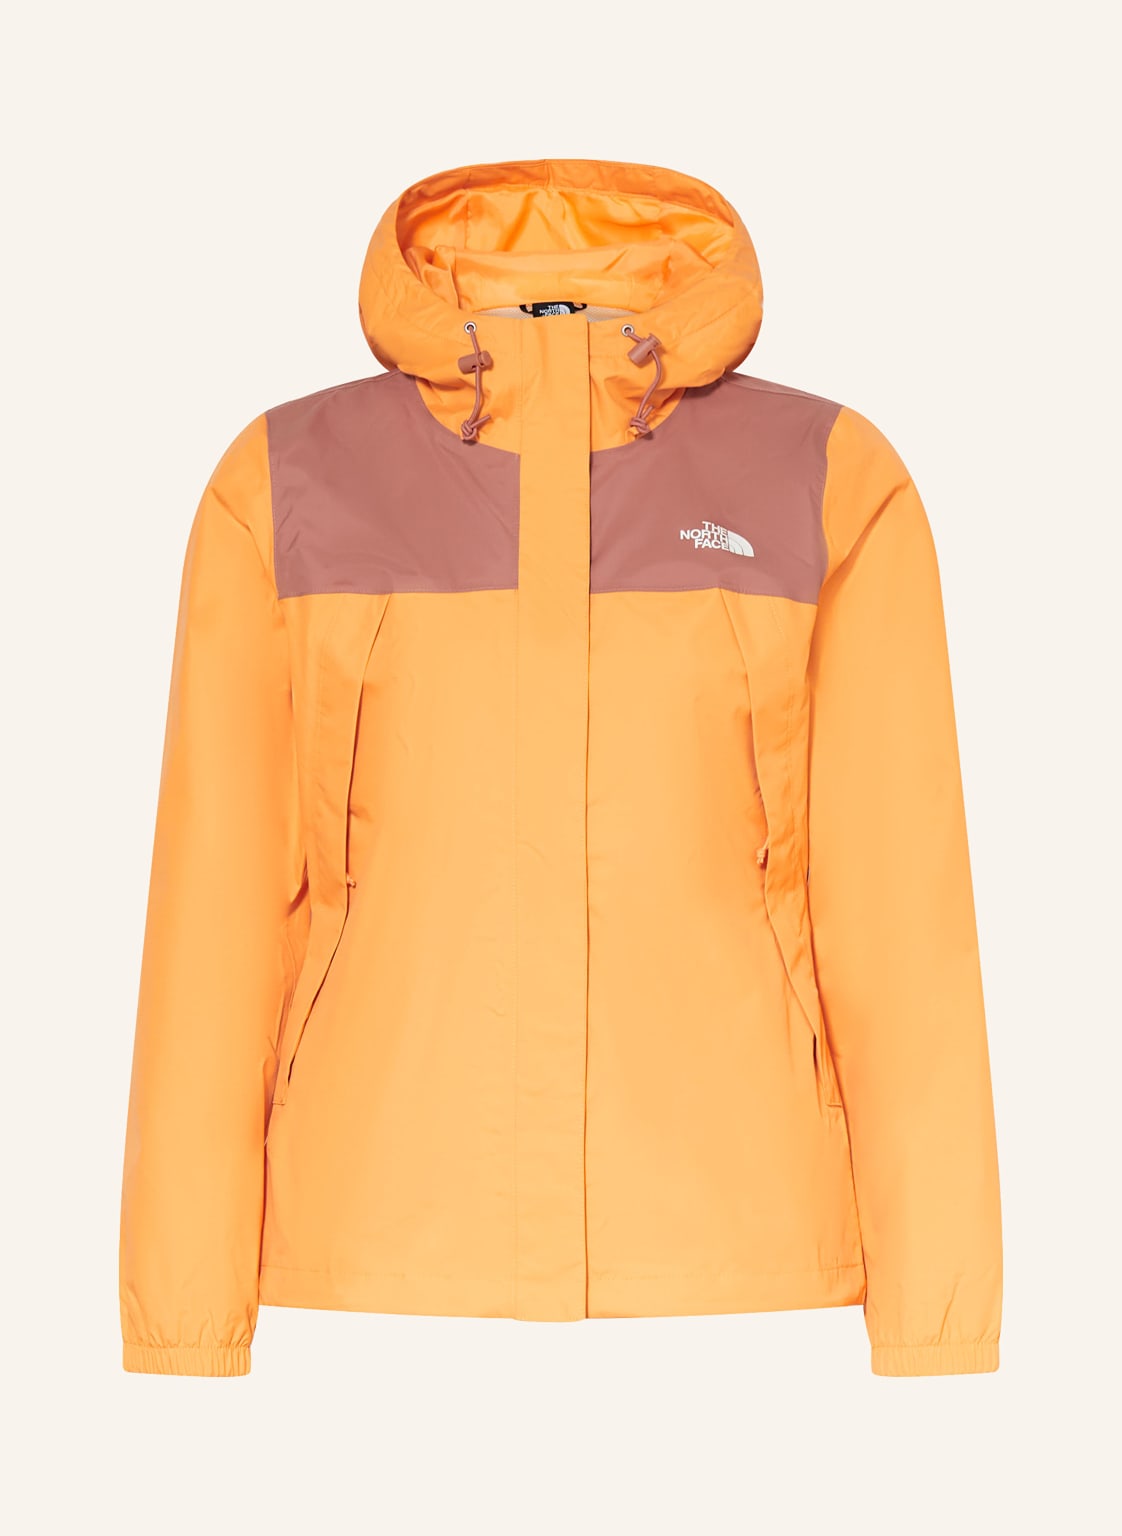 The North Face Funktionsjacke Antora rot von The North Face